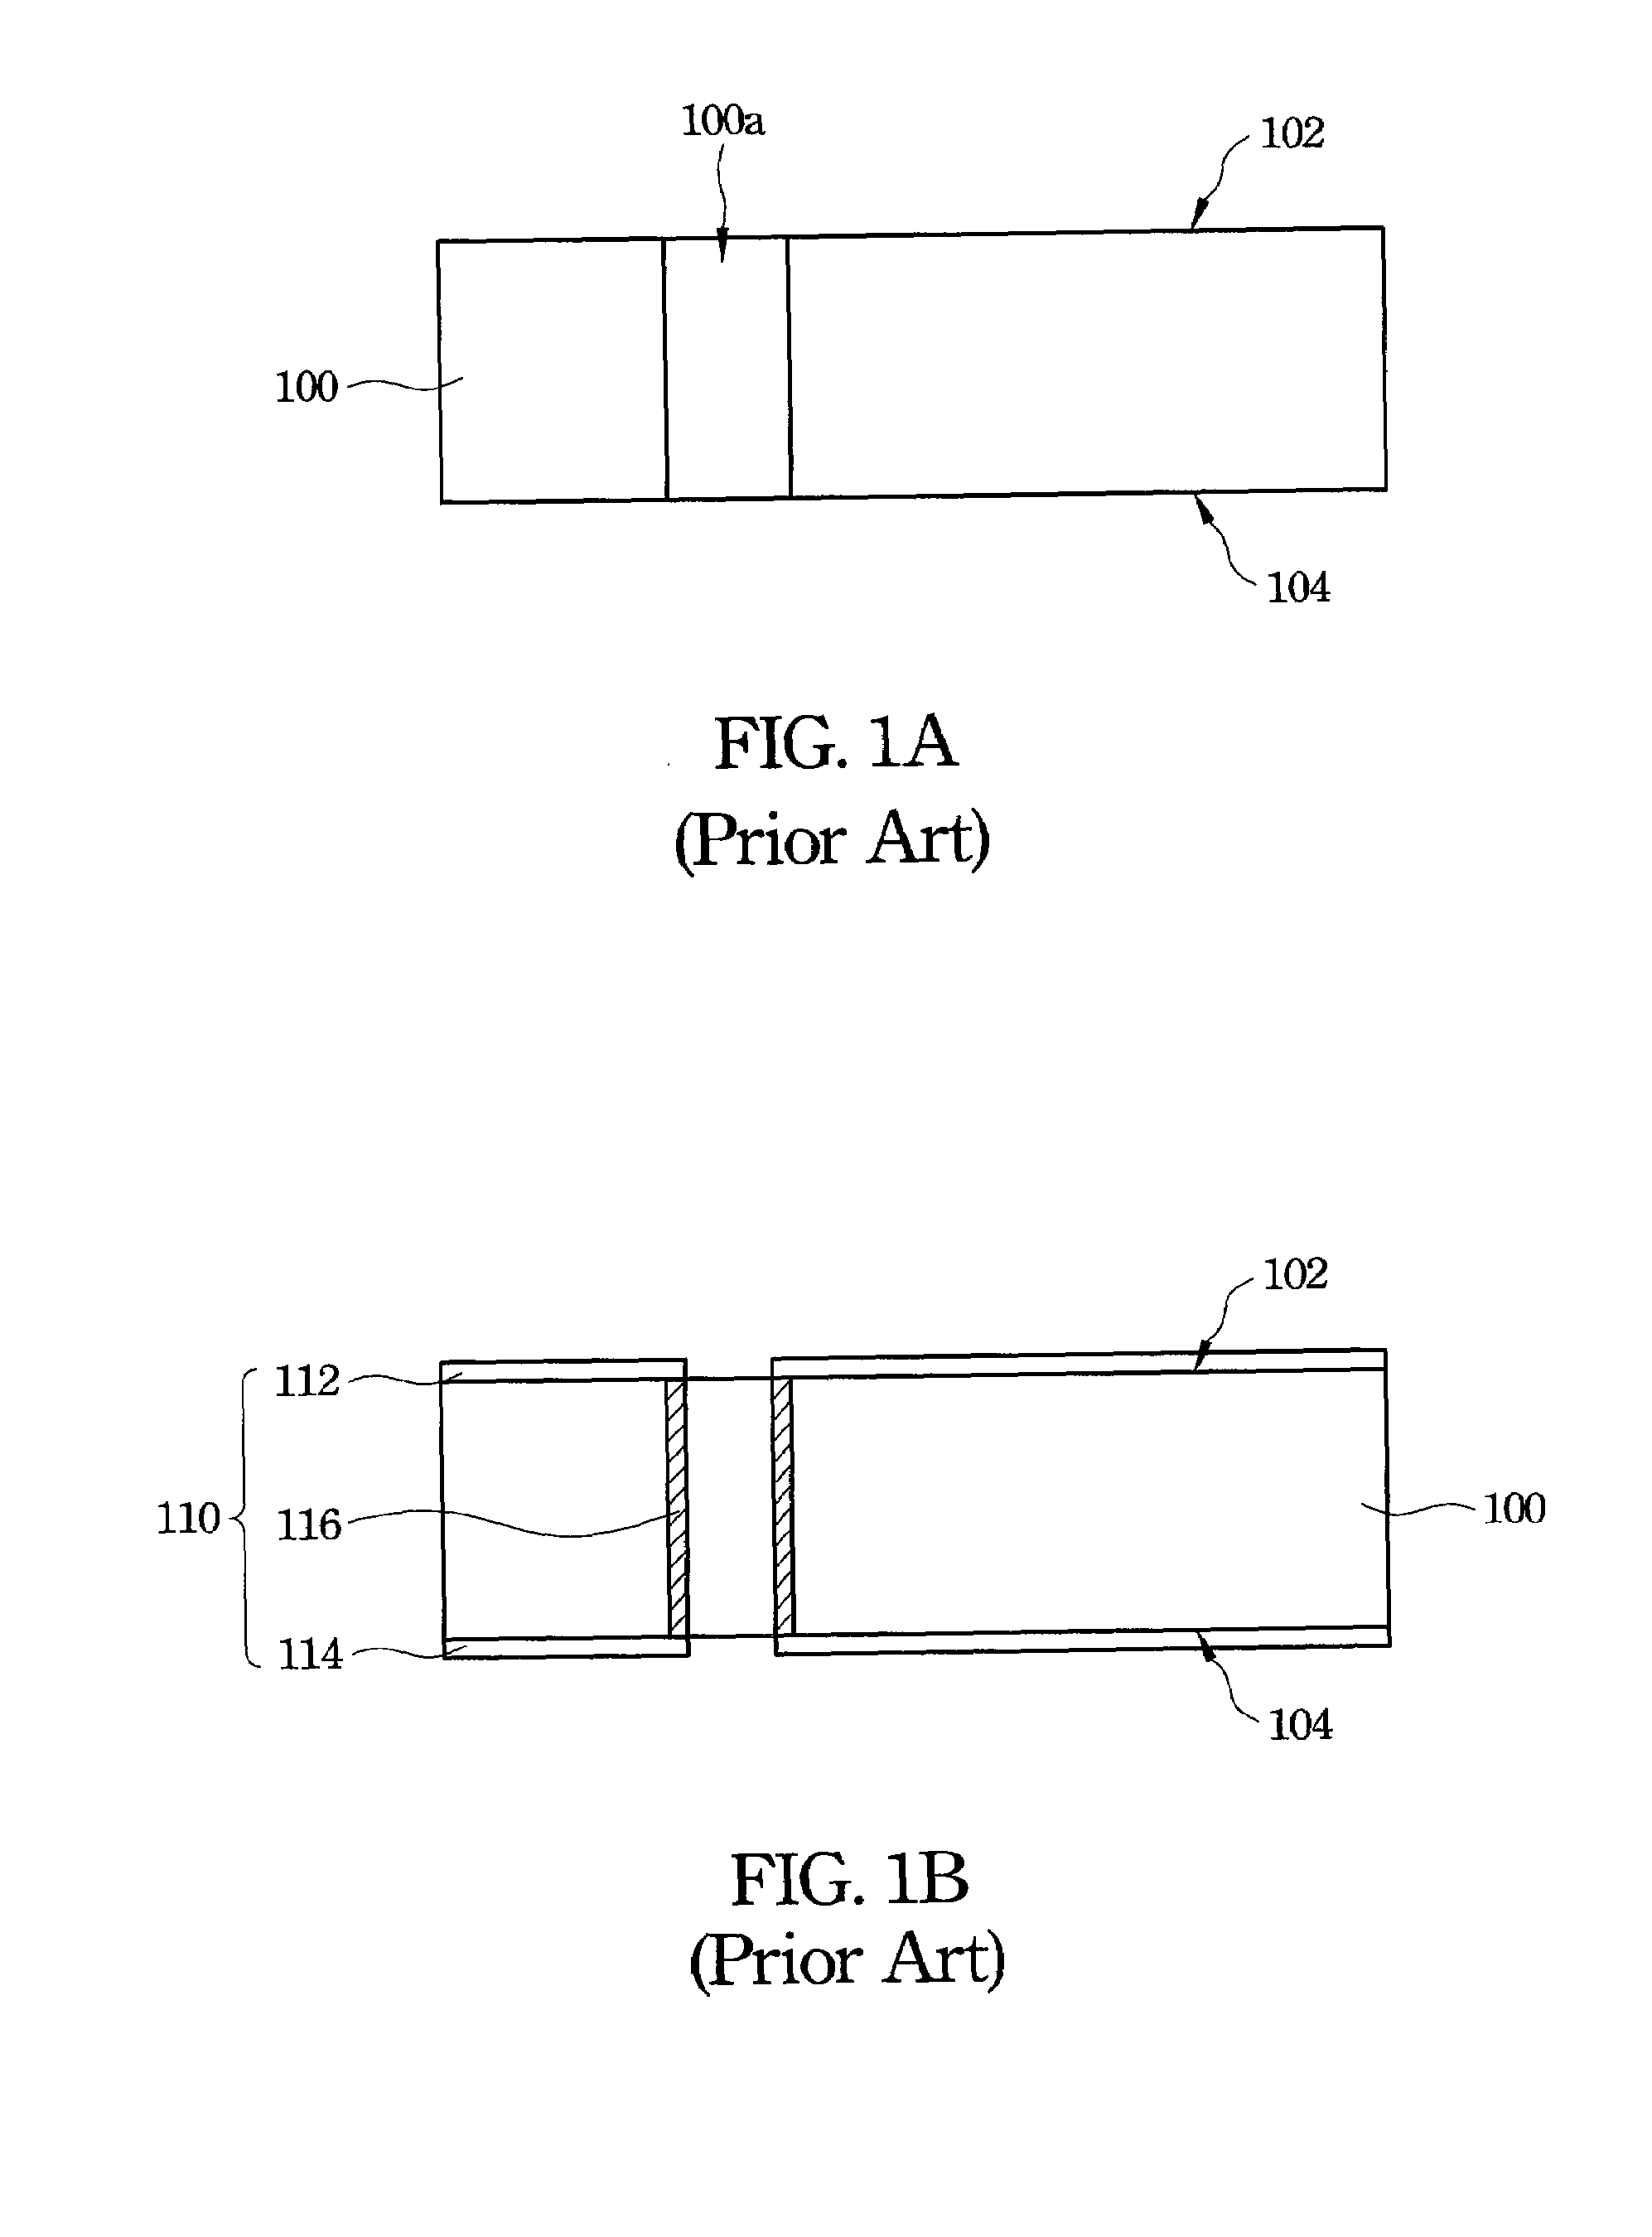 Method of Manufacturing the Substrate for Packaging Integrated Circuits